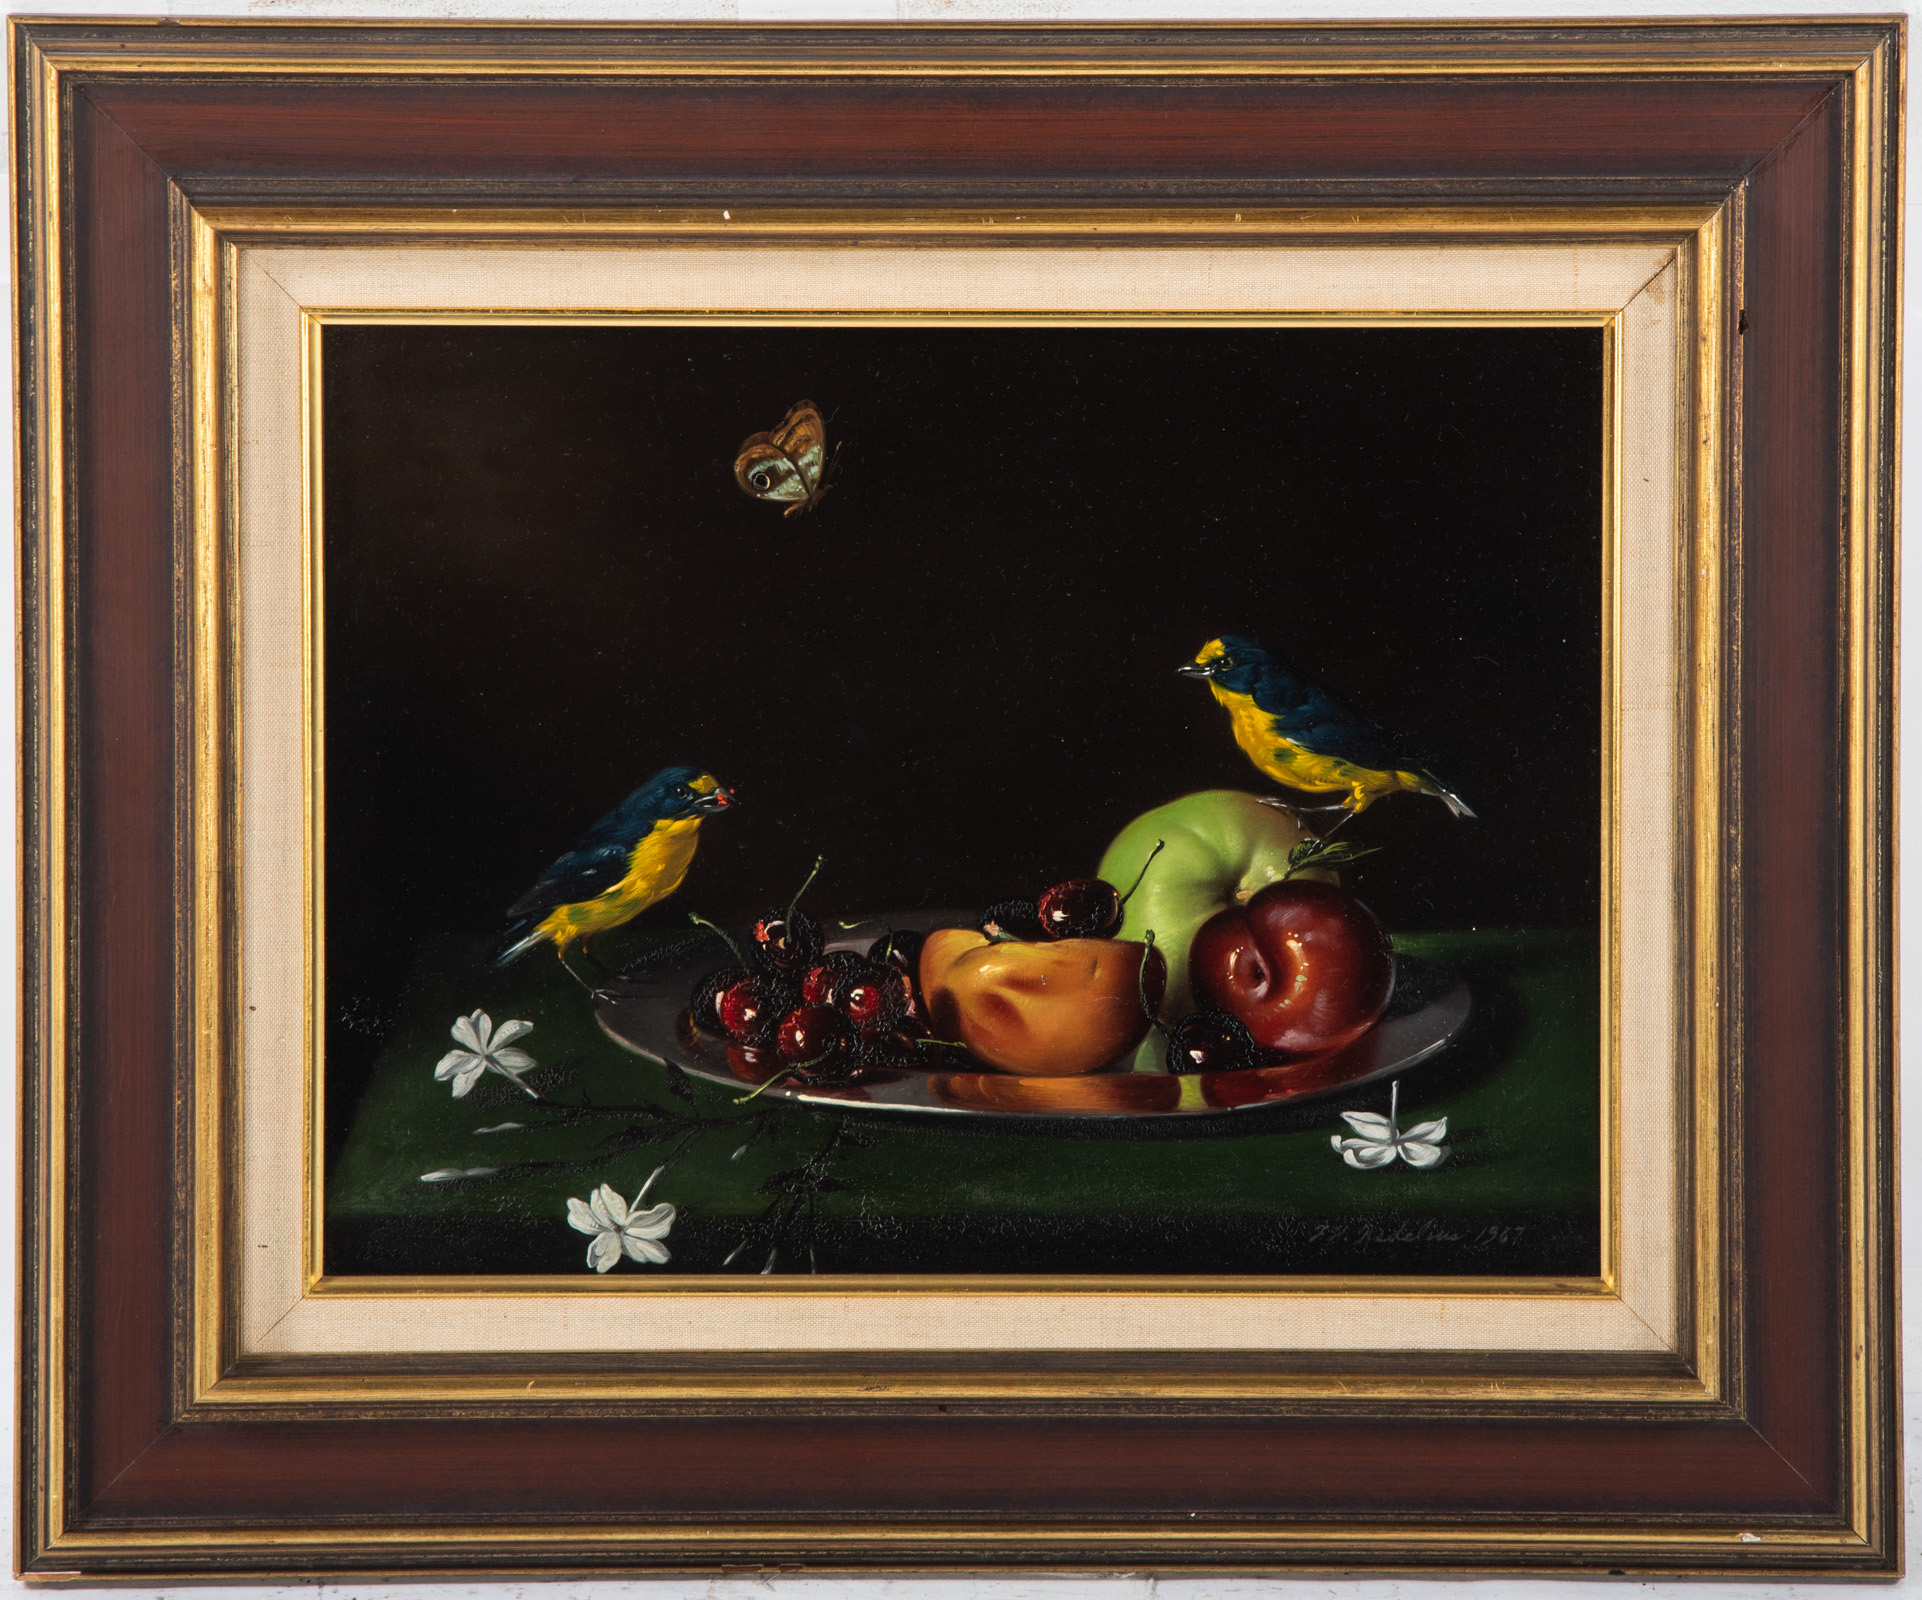 FRANK H. REDELIUS. "FINCHES," OIL